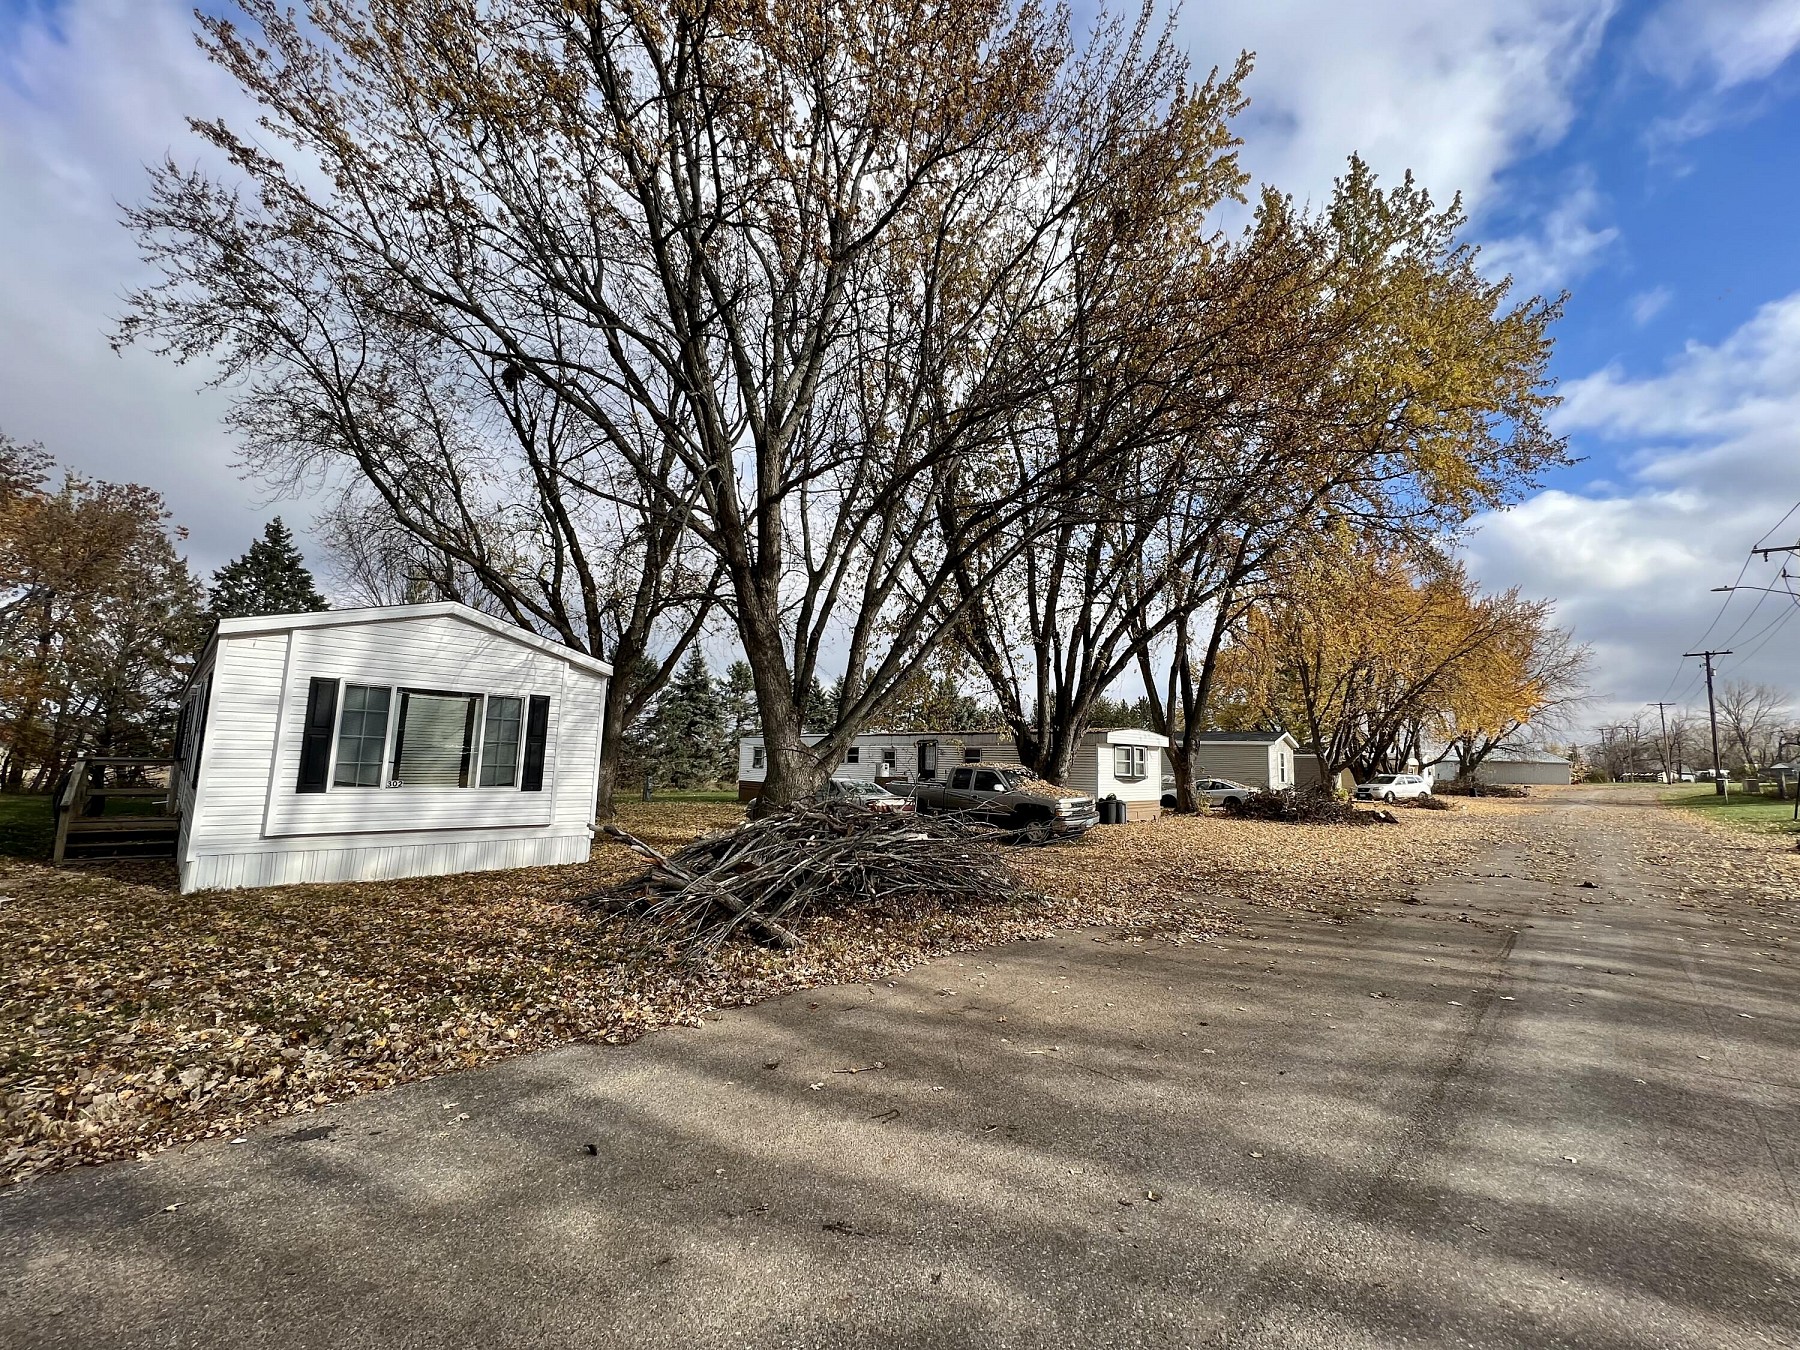 Lots 3-6 Railroad Ave S, Clear Lake, SD 57226